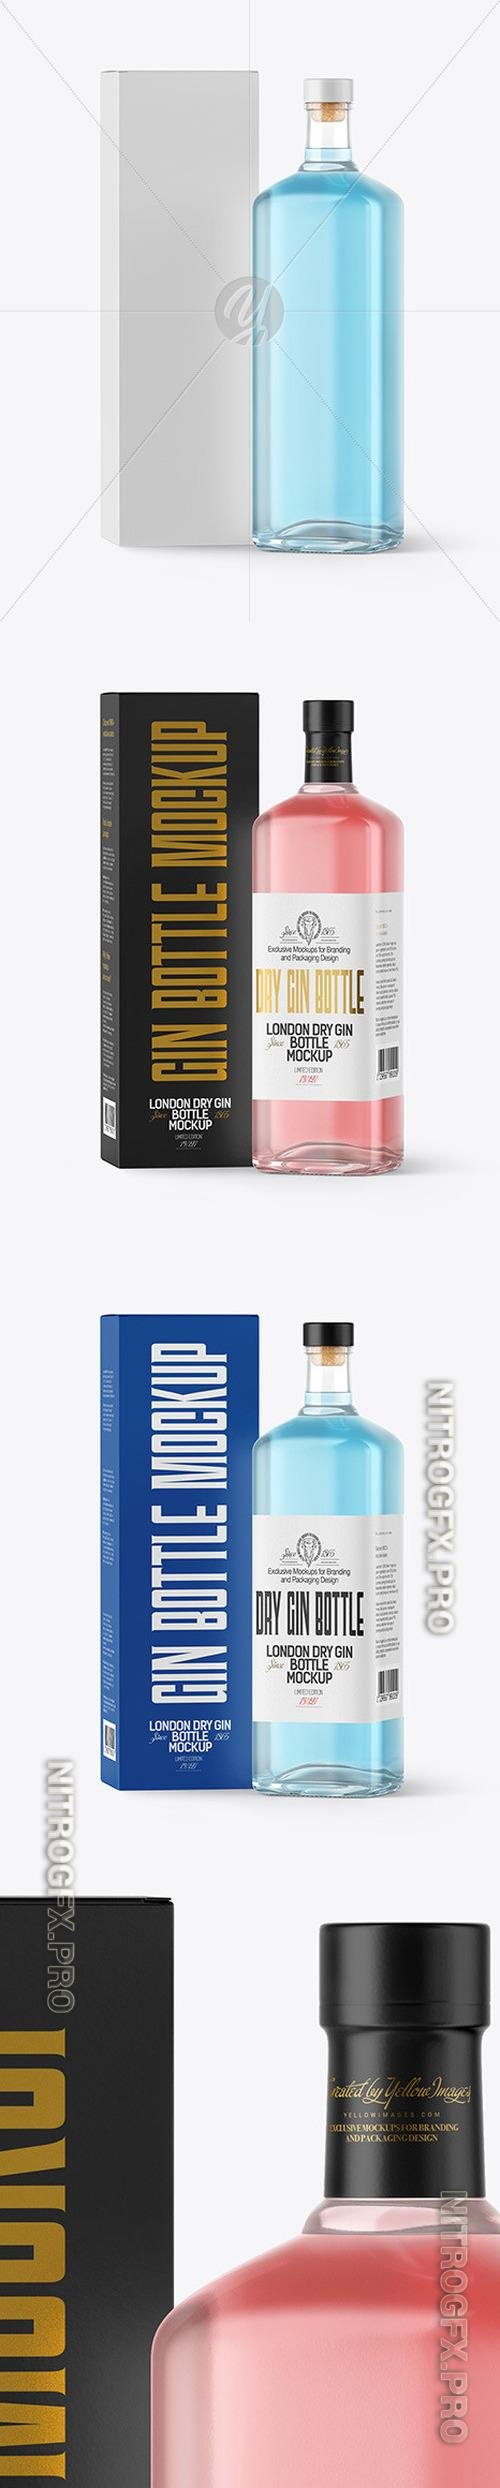 Gin Bottle with Box Mockup - 53586